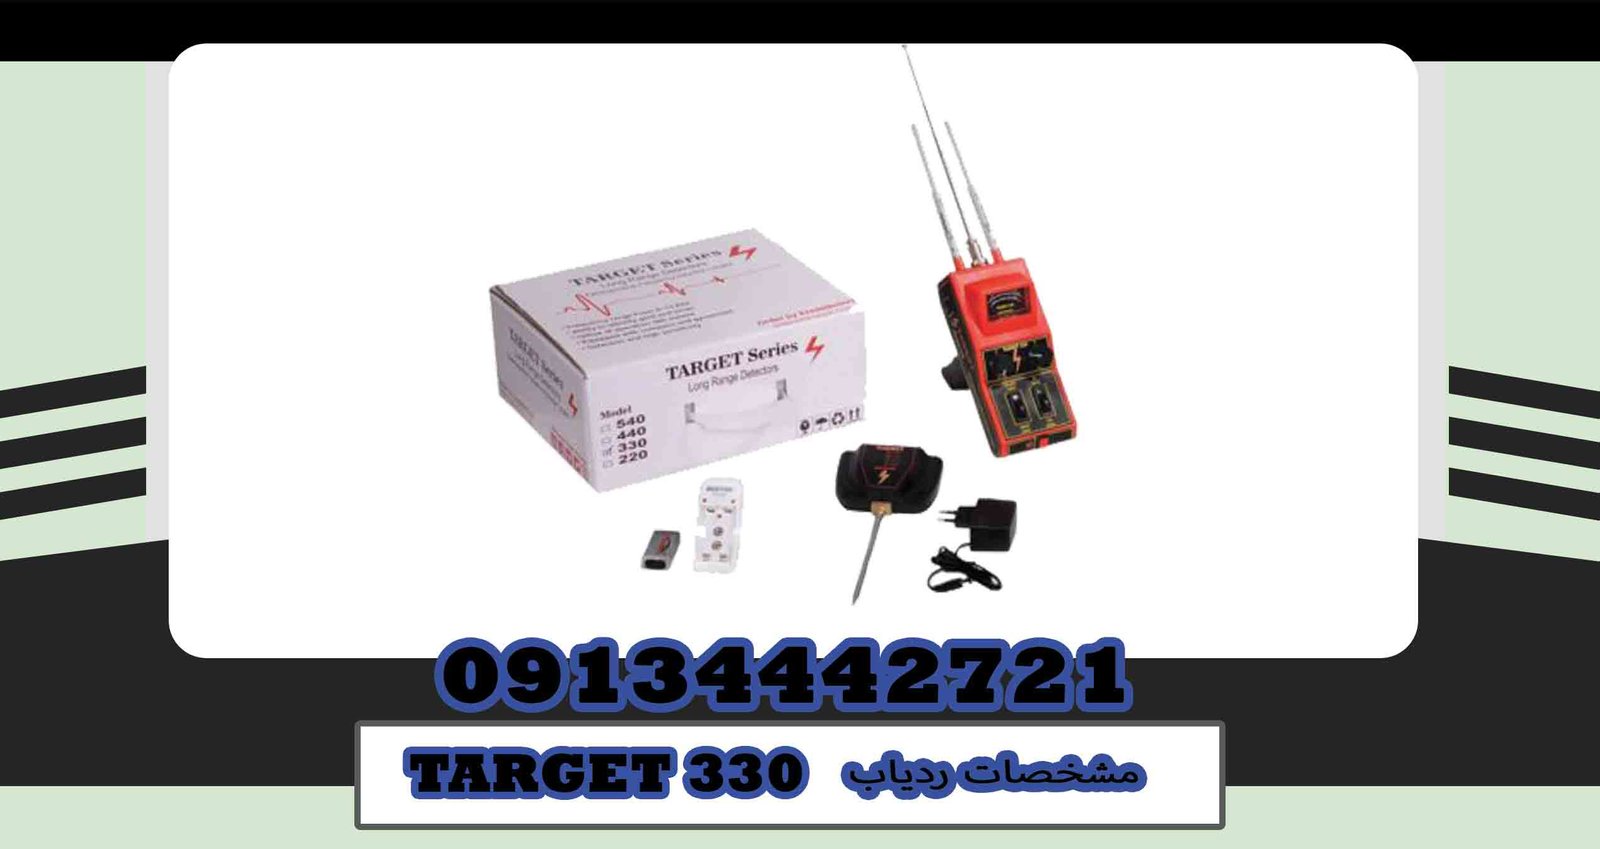 Specifications of the TARGET 330 tracker